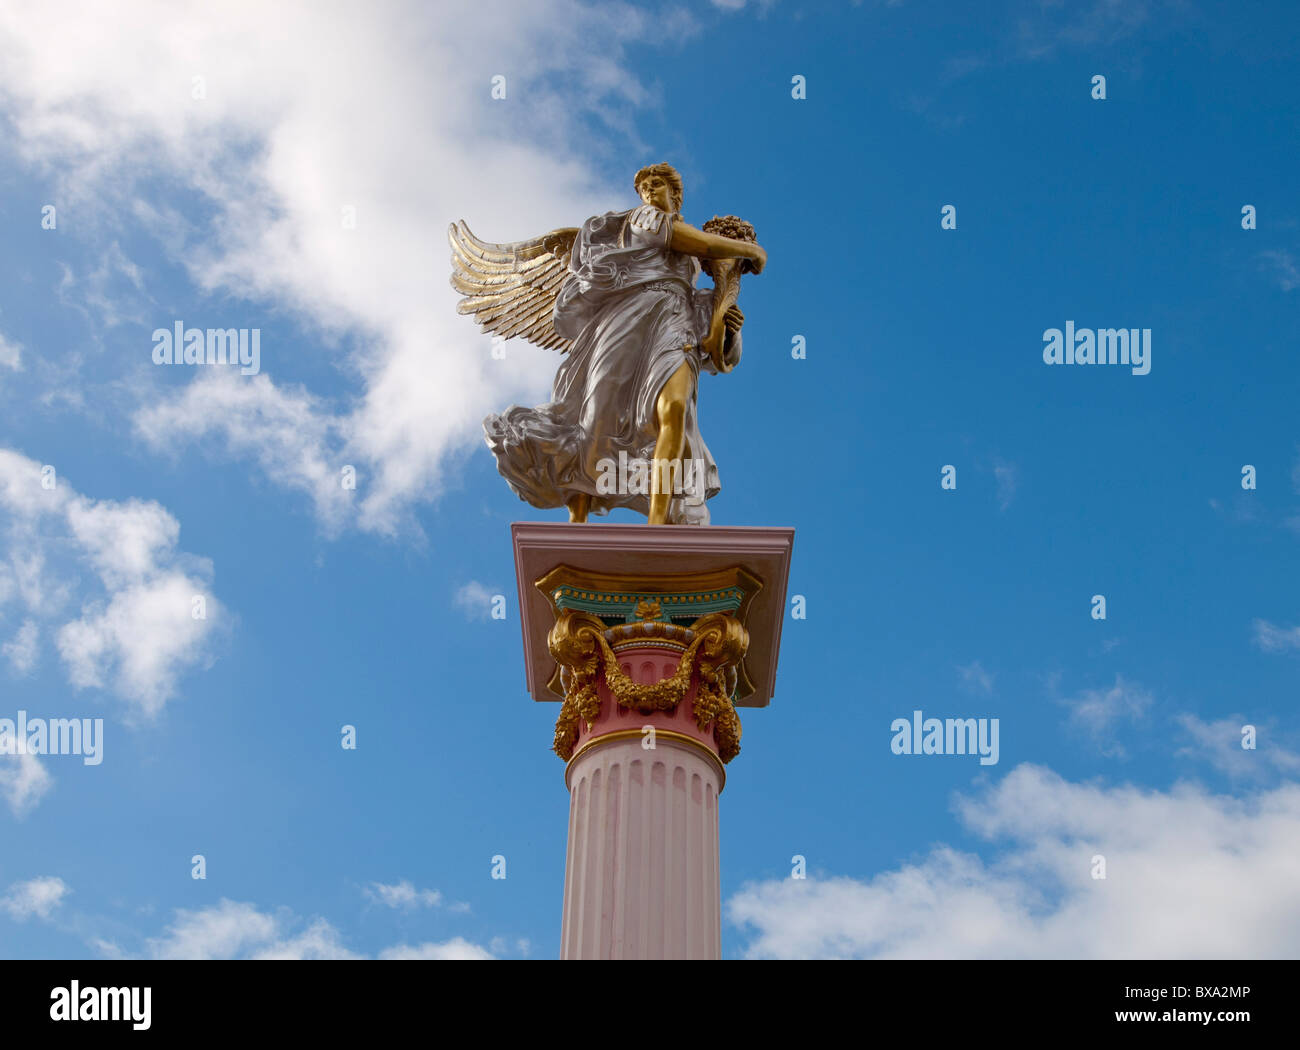 The greek or roman angle with wings on the high column garden statues Stock Photo